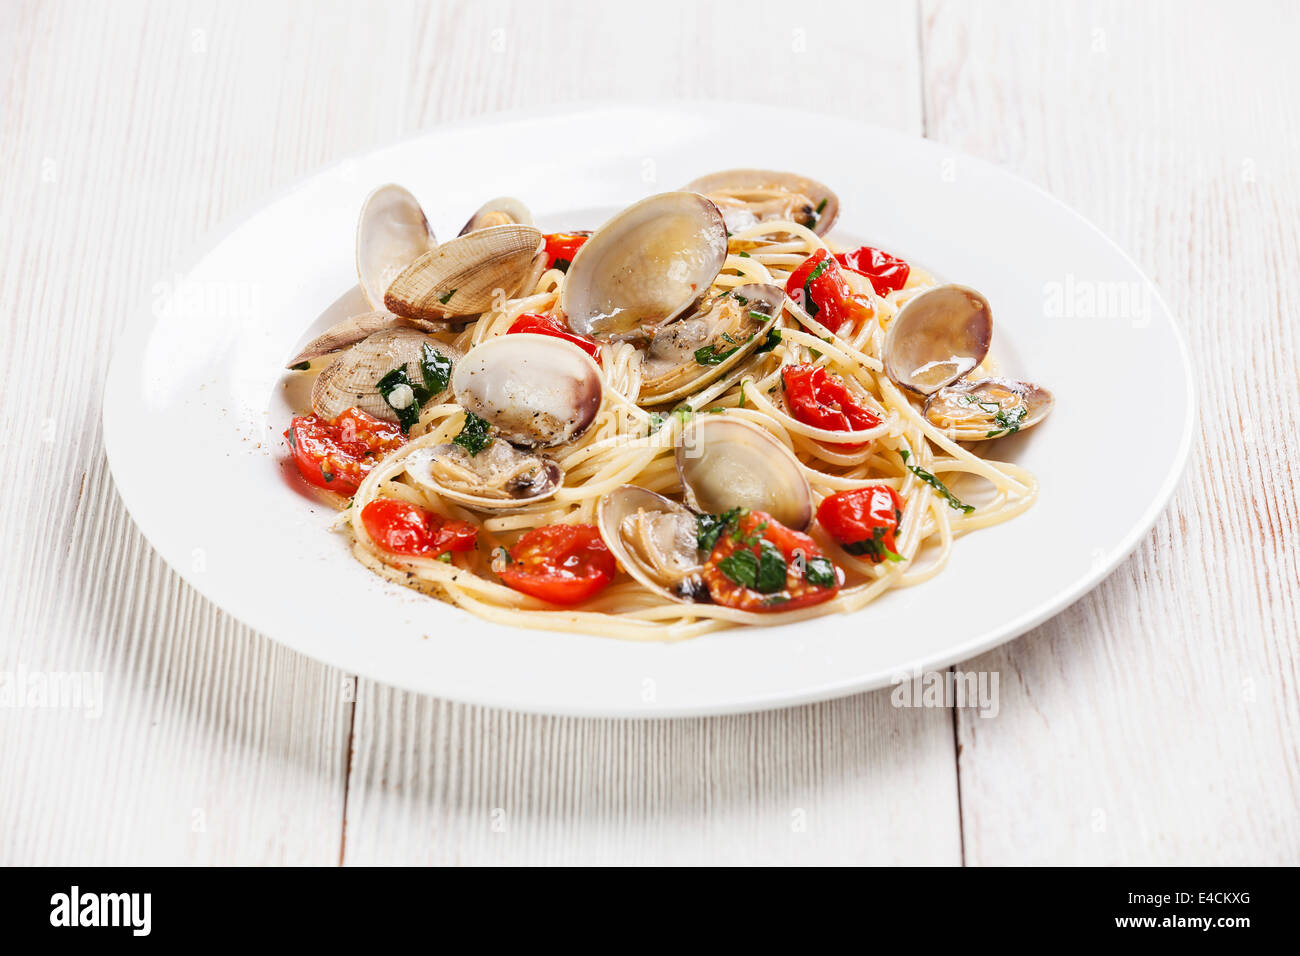 Seafood pasta with clams in tomato sauce Spaghetti alle Vongole on white wooden background Stock Photo